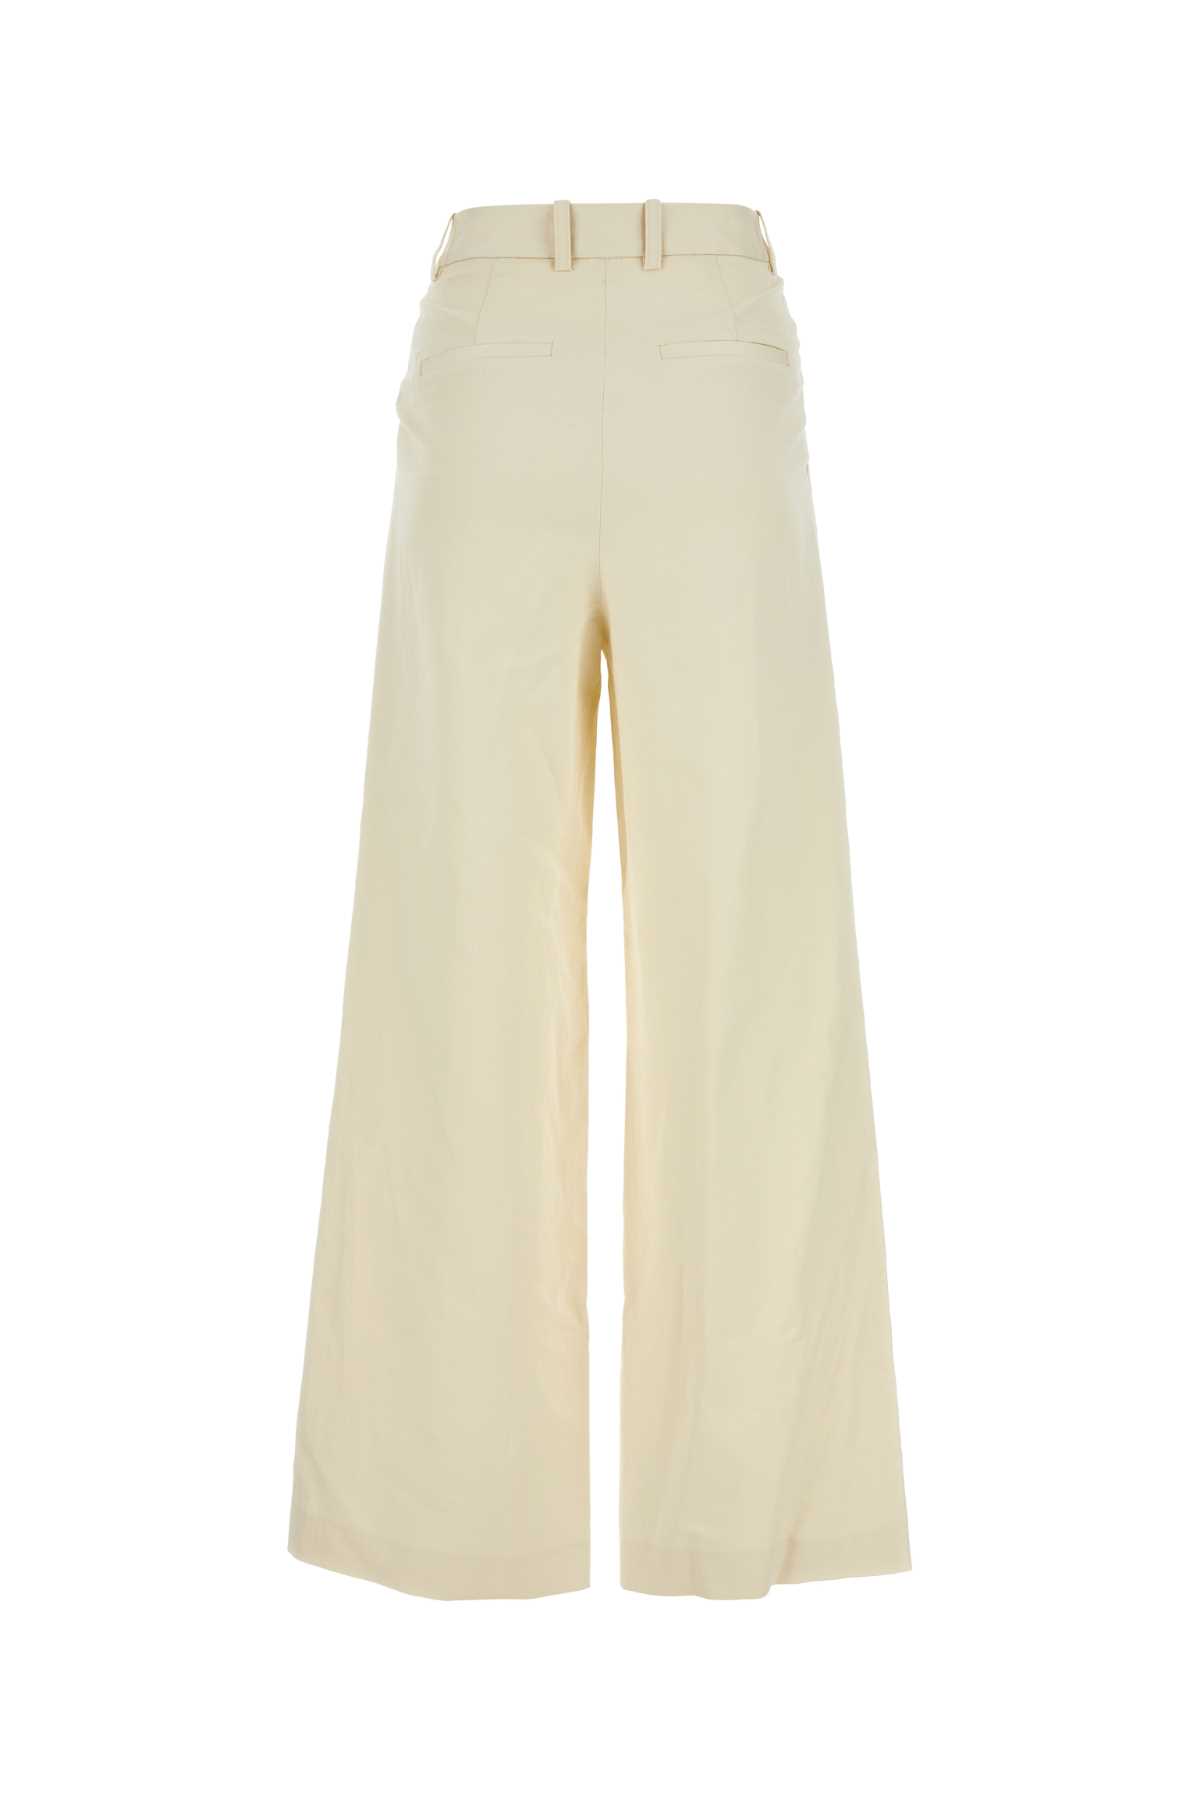 Loulou Studio Ivory Cotton Blend Idai Palazzo Trouser In Frostivory